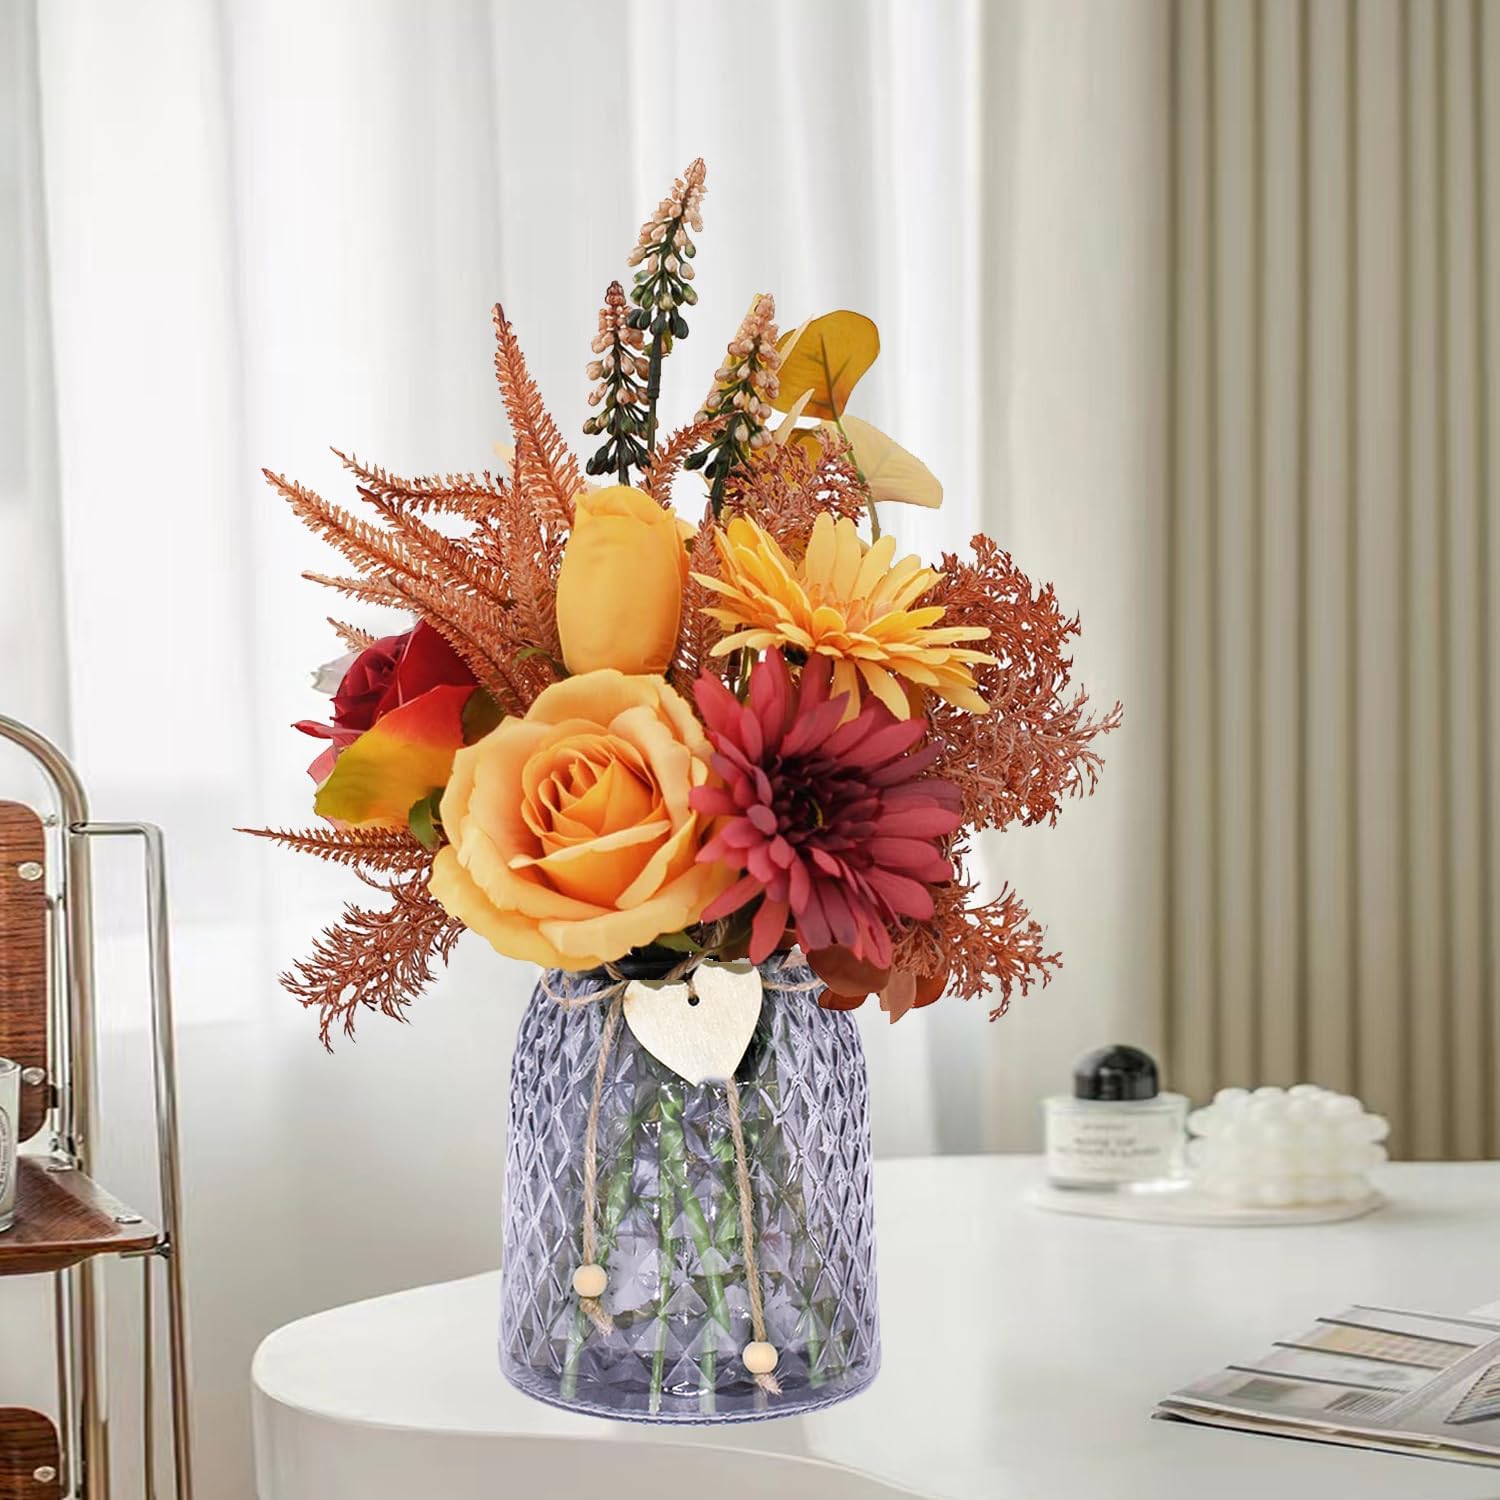 Faux Flowers in Vase - Hydrangea Fall Centerpieces for Tables Fake Flowers with Vase Dining Table Decor, Fake Roses Chrysanthemum Fall Flowers Artificial for Decoration